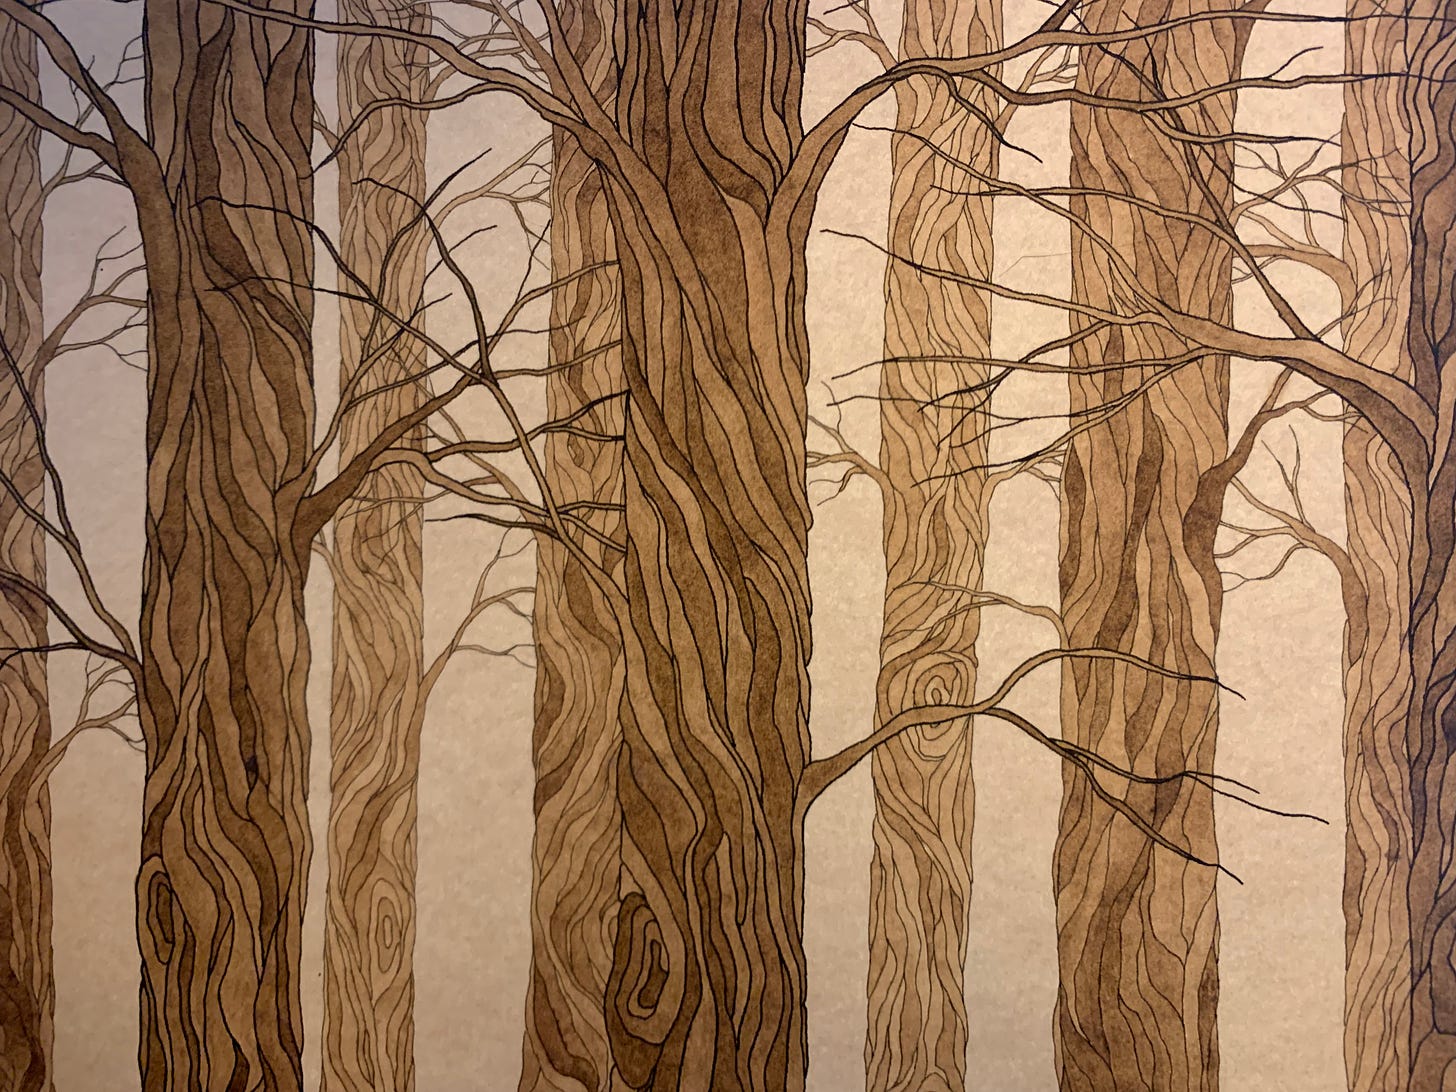 An ink drawing of trees with bare branches, with the bark outlined in black. The photo is of a drawing on paper, with the light source on the right, creating a cooler shadow on the left.